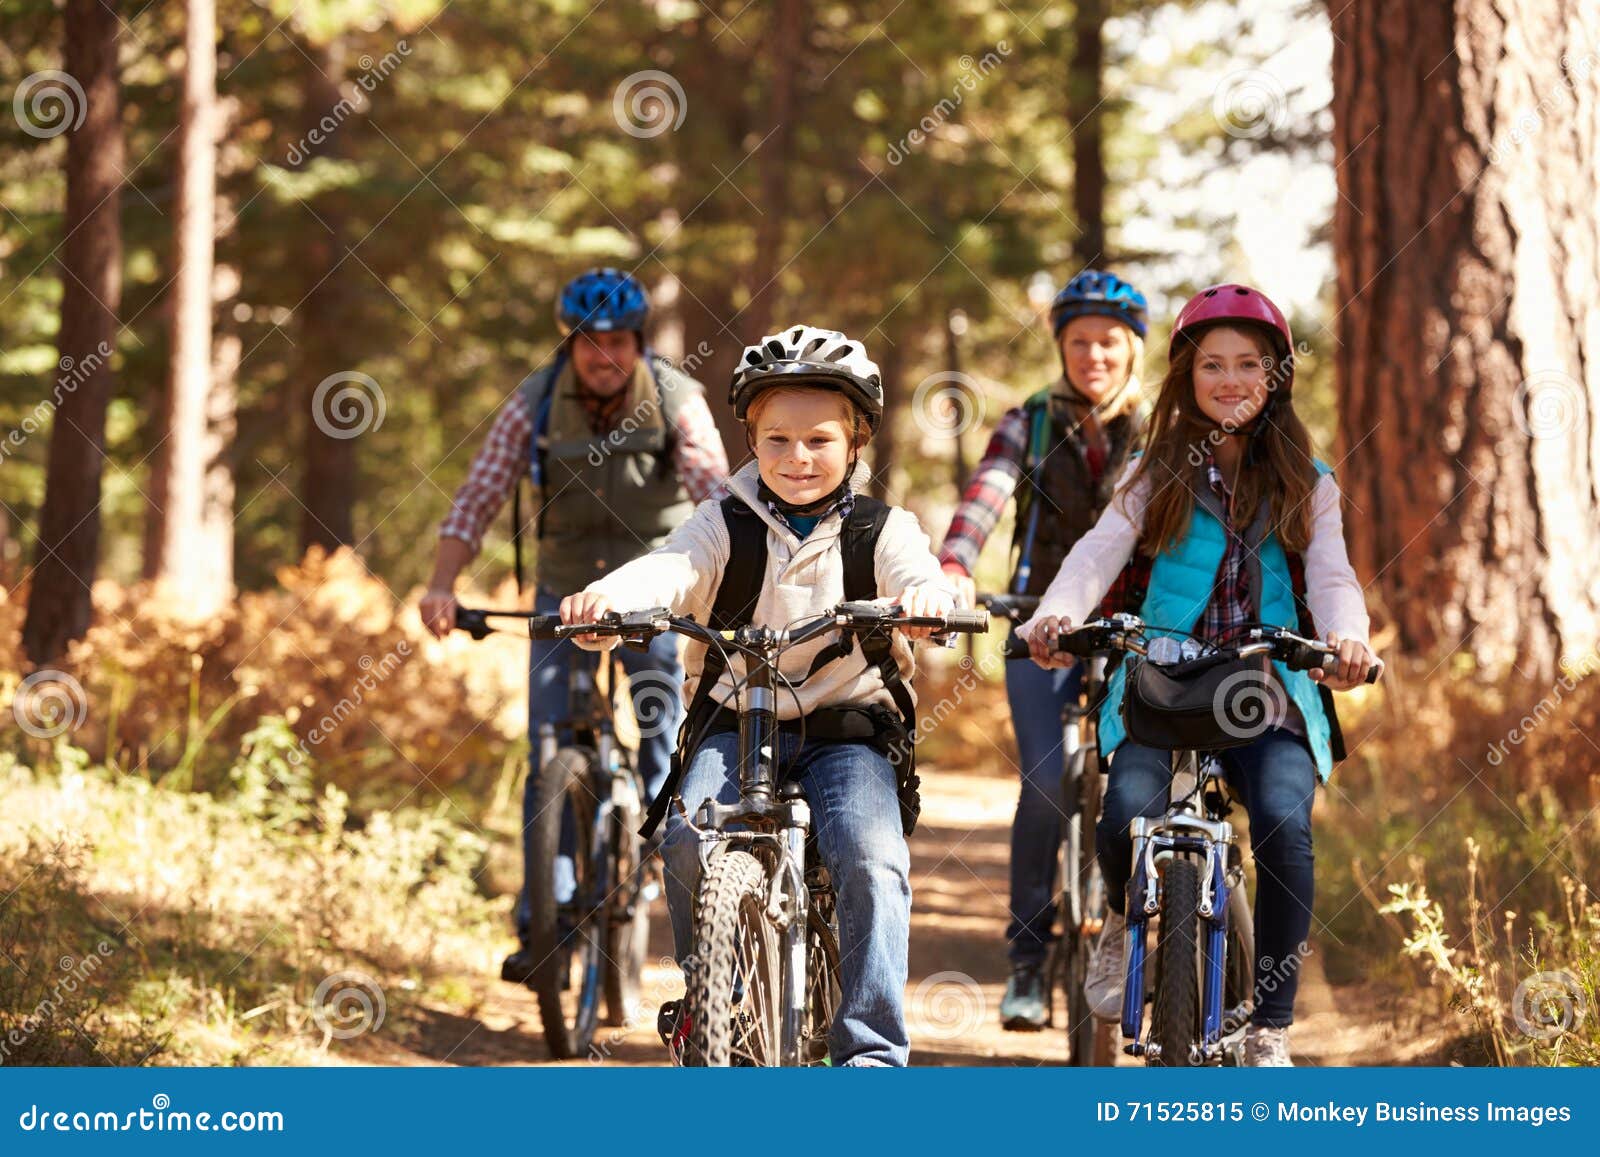 family mountain biking on forest trail, front view